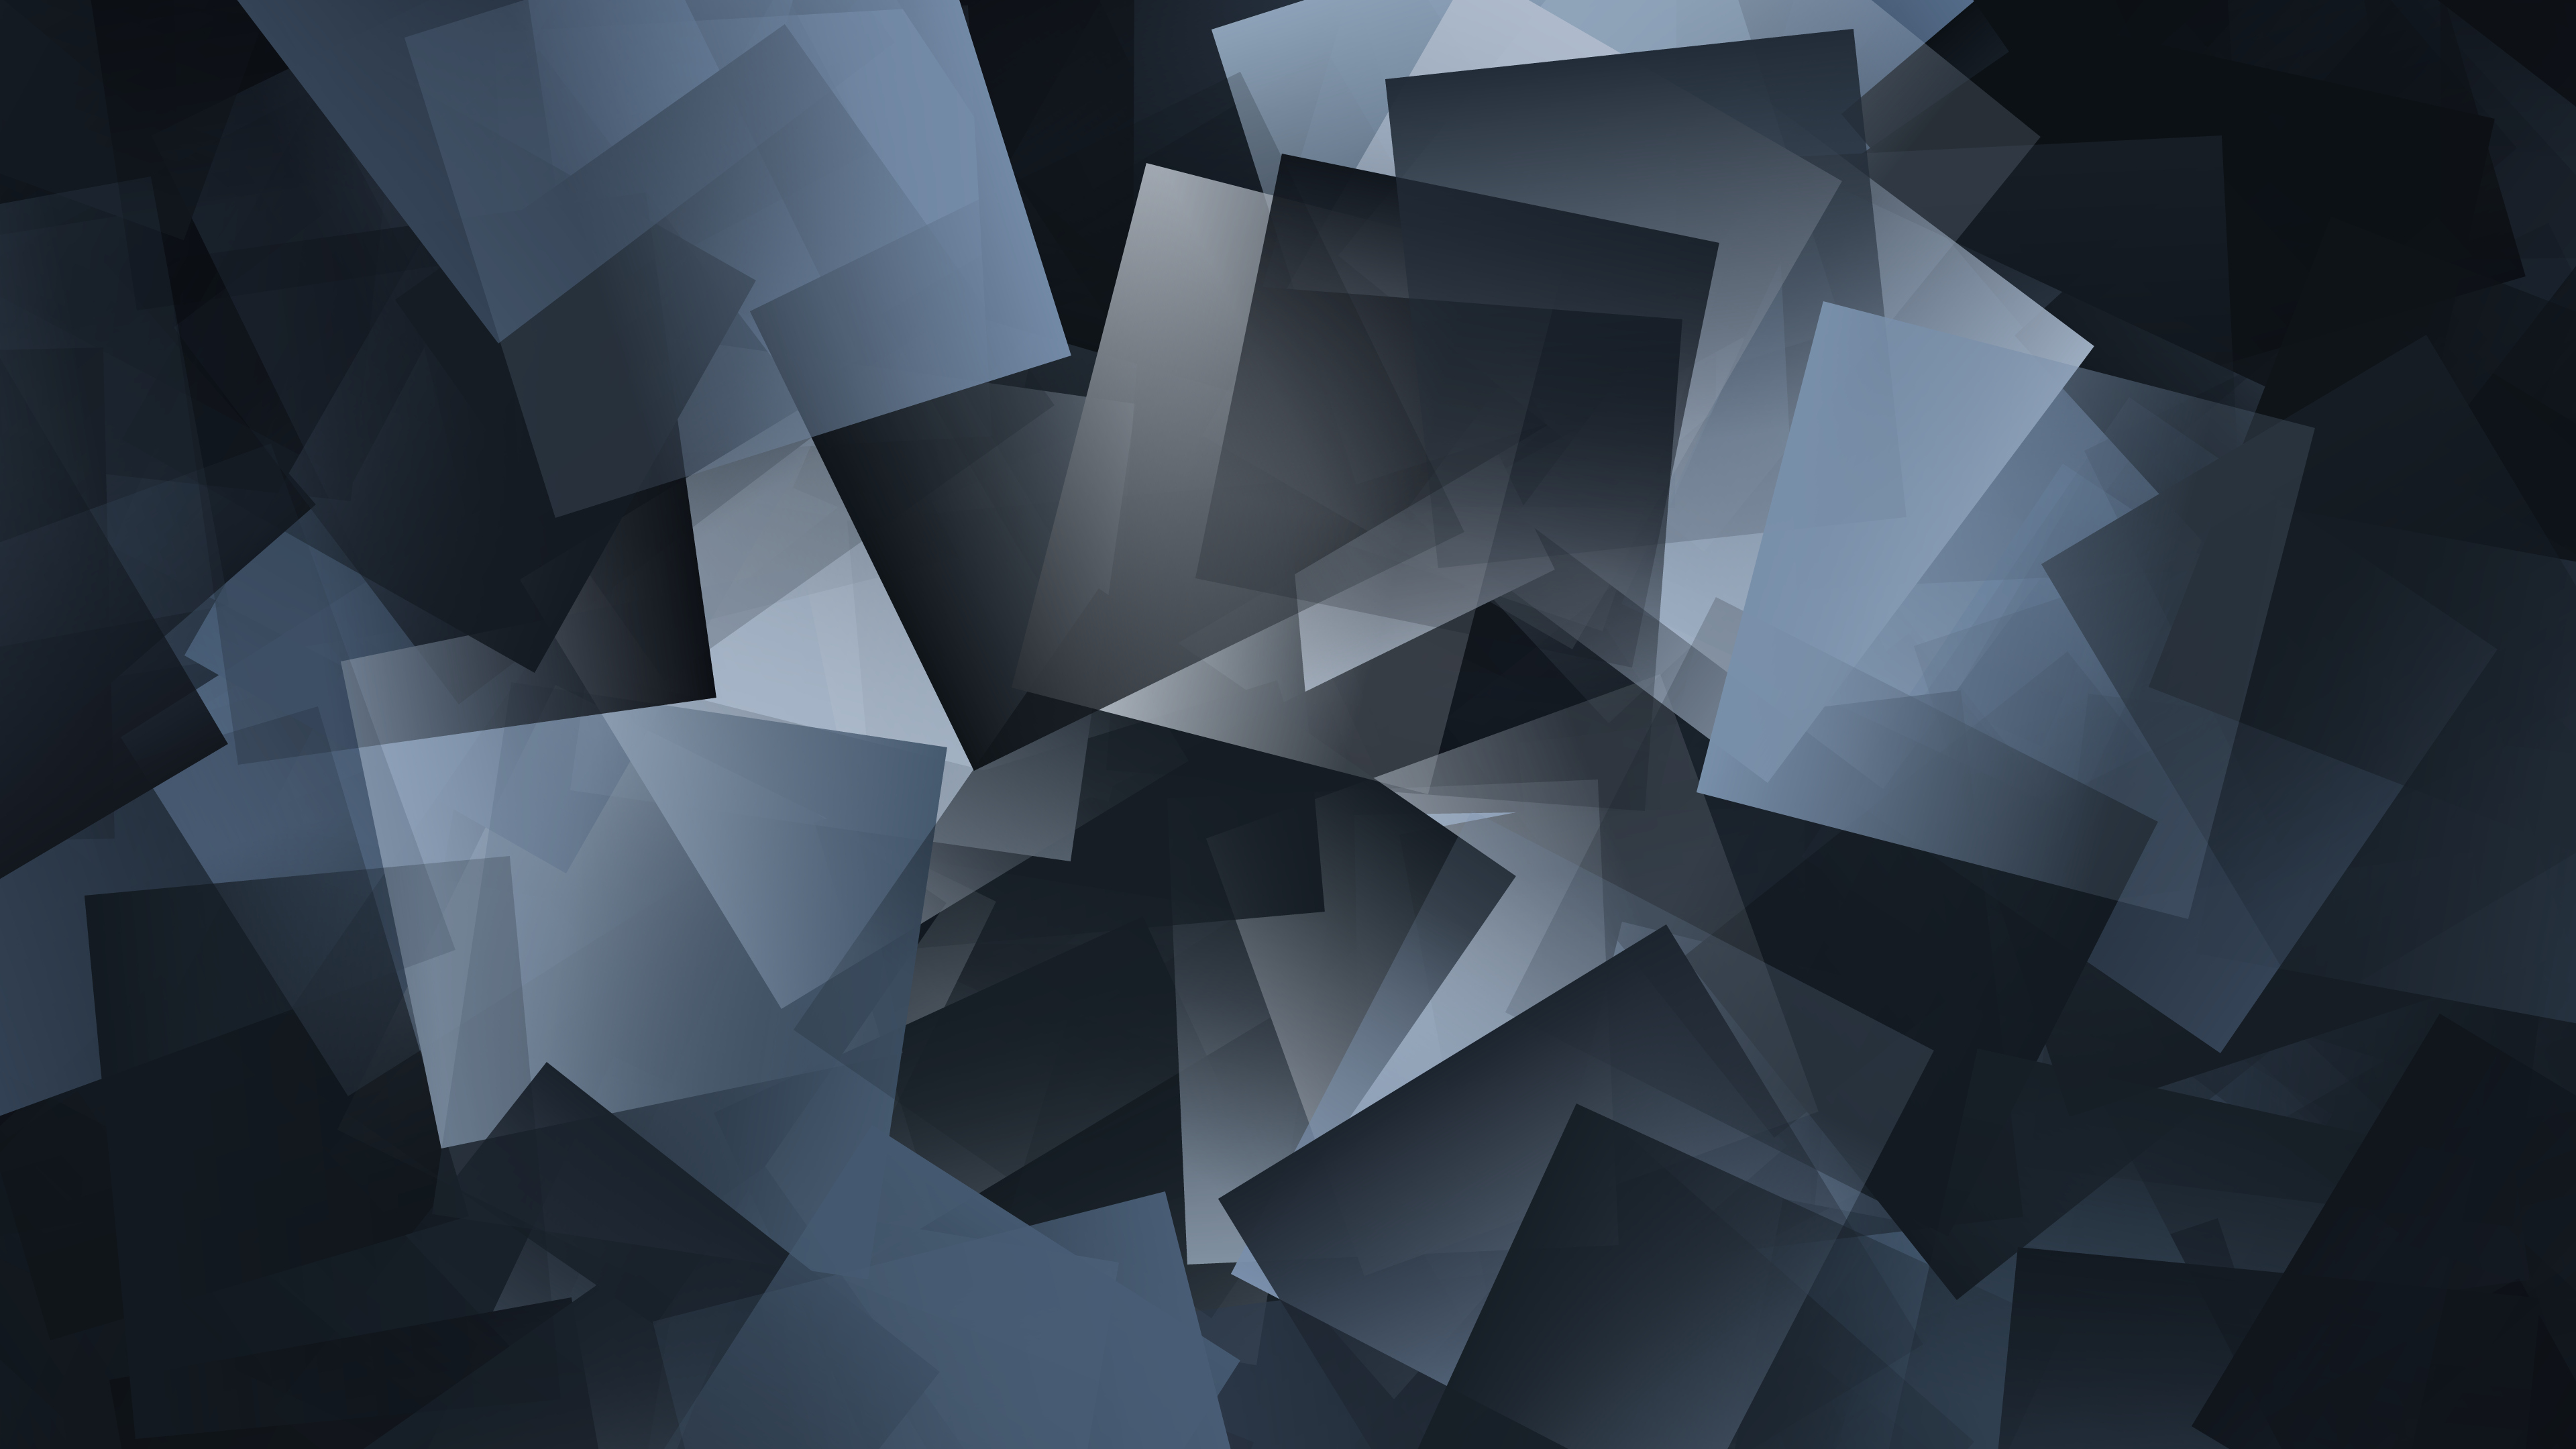 Rave Cube Abstract Geometry Square Gradient Gray Artwork 3840x2160